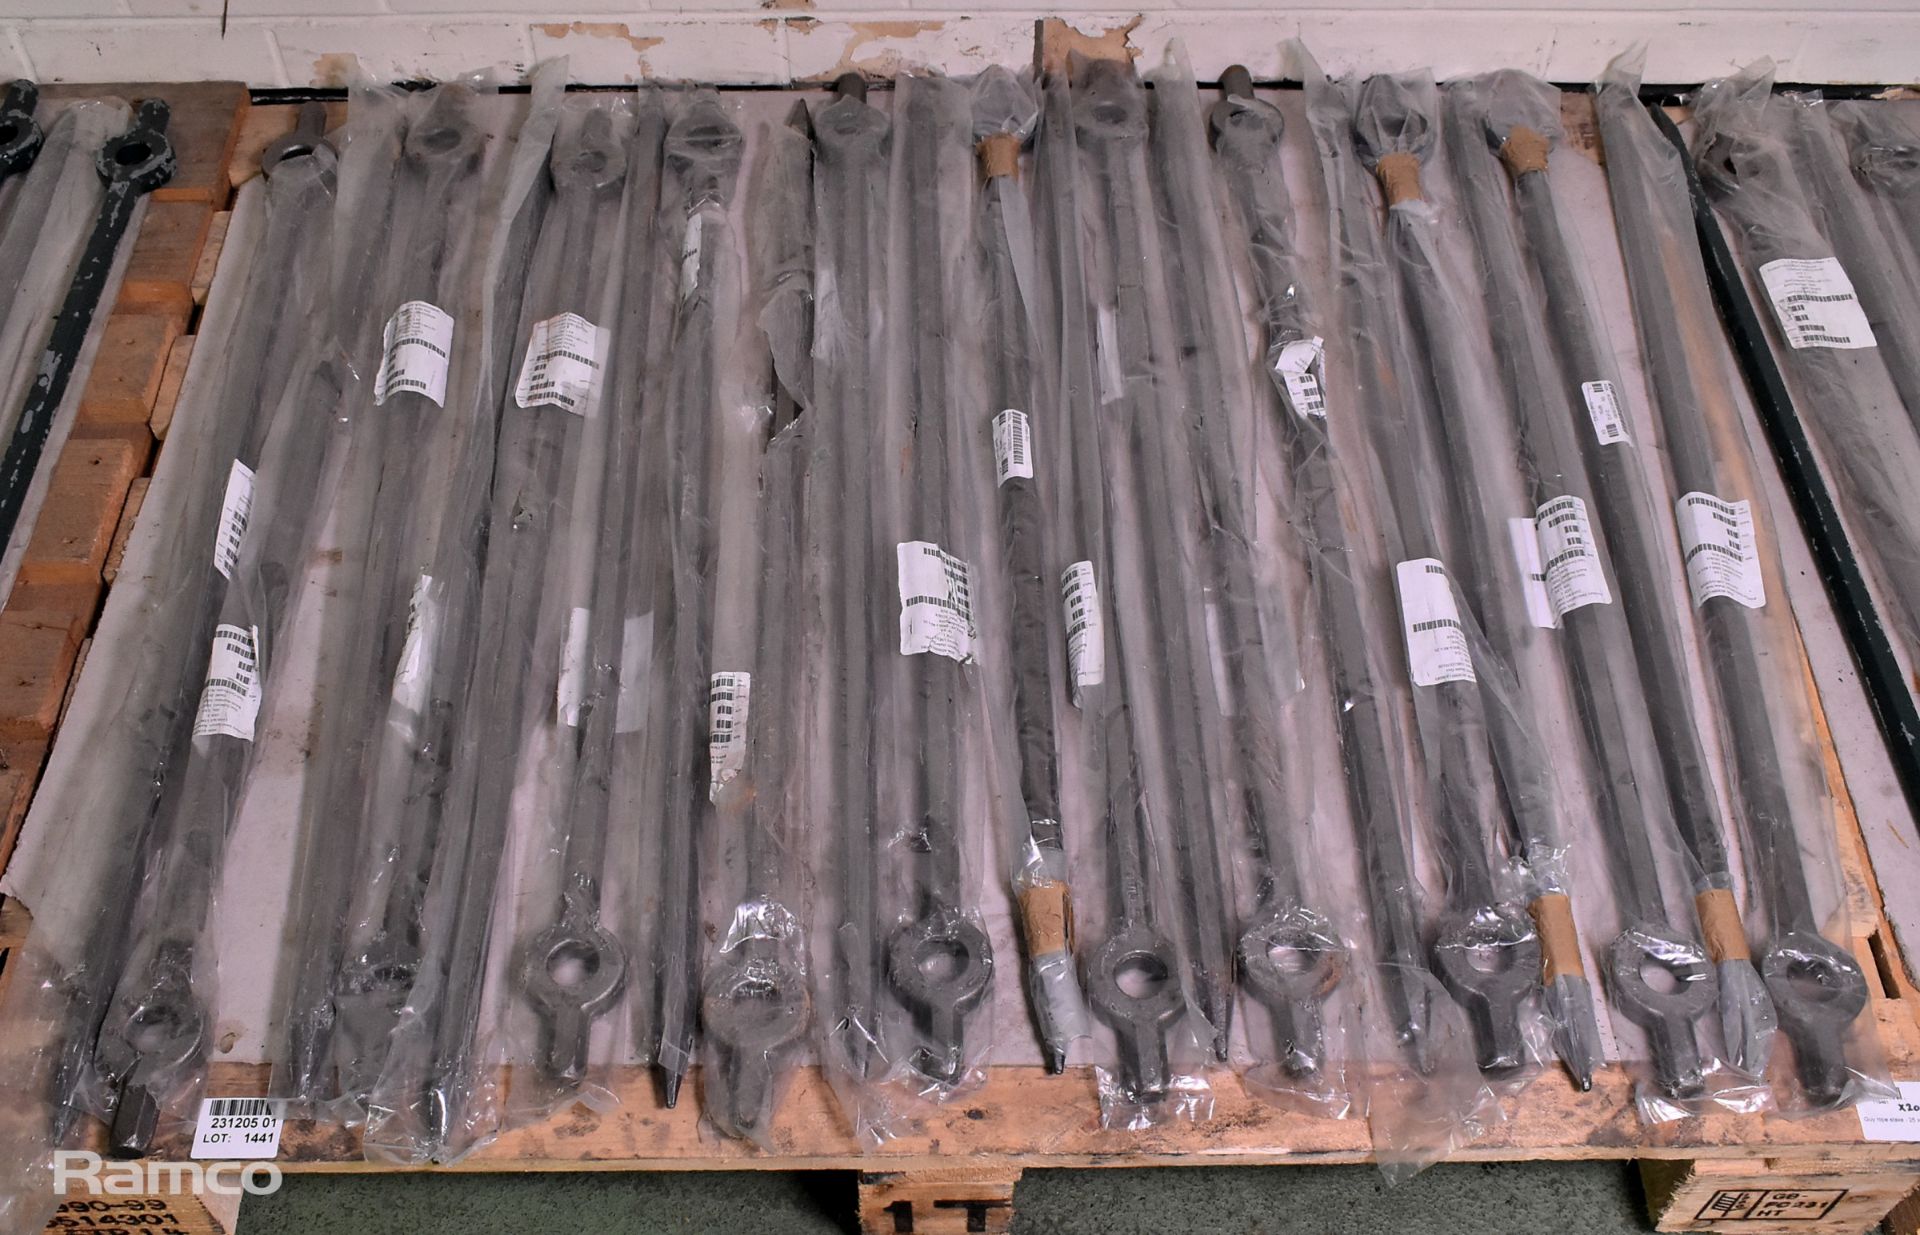 20x Ground anchoring stakes - hexagonal shaft with eye - 25 x 950mm